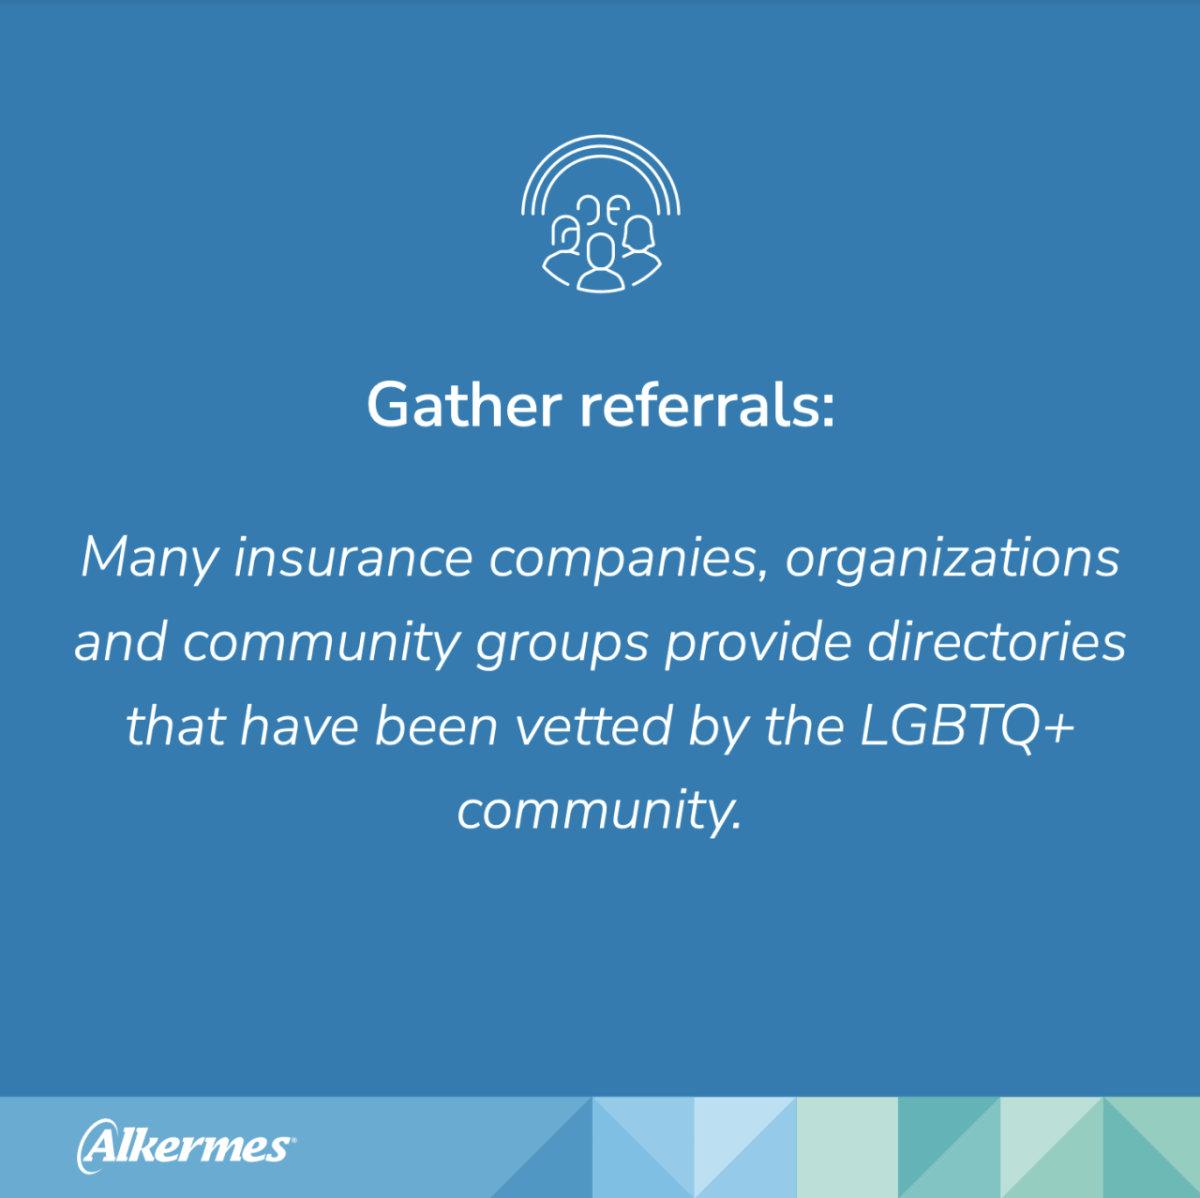 PDF Slide with the text "Gather referrals: many insurance companies, organizations and community groups provide directories that have been vetted by the LGBTQ+ community"